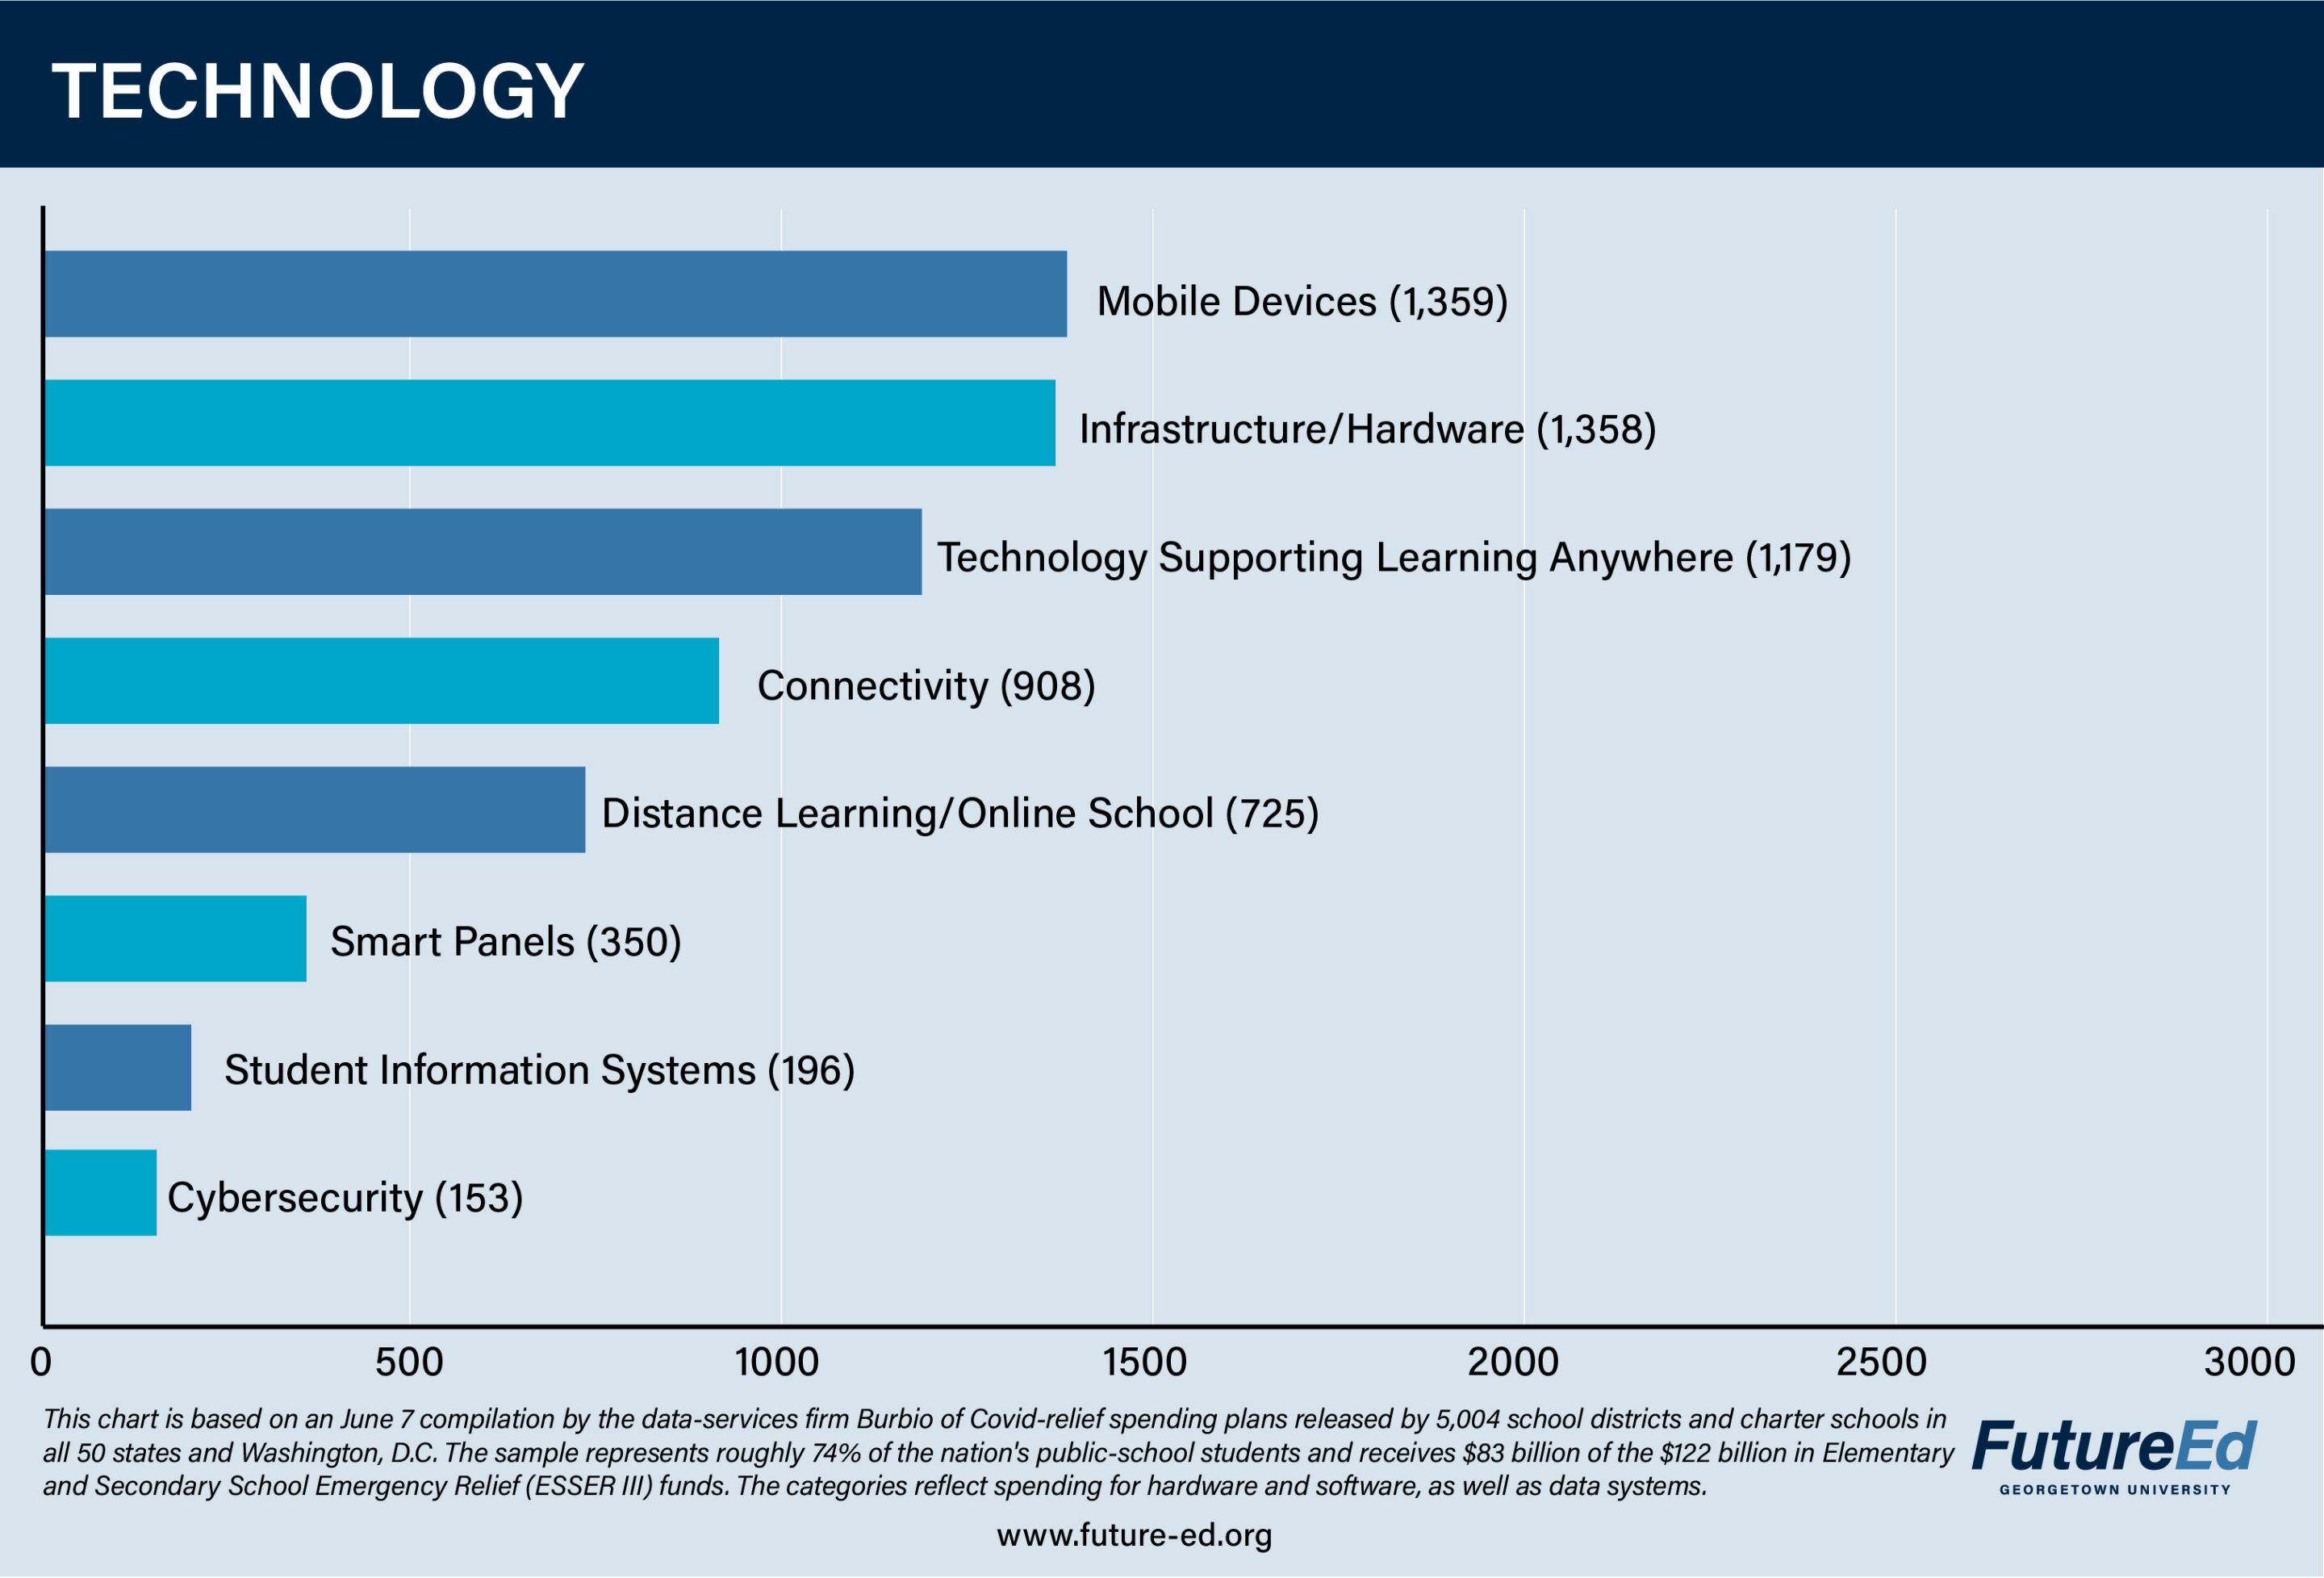 Chart: Technology. Mobile devices: 1,359. Infrastructure/hardware: 1,358. Technology supporting learning anywhere: 1,179. Connectivity: 908. Distance learning/online school: 725. Smart panels: 350. Student information systems: 196. Cybersecurity: 153. (This chart is based on a June 7 compilation by the data-services firm Burbio of Covid-relief spending plans released by 5,004 school districts and charter schools in all 50 states and Washington, D.C. The sample represents roughly 74% of the nation's public-school students and receives $83 billion of the $122 billion in Elementary and Secondary School Emergency Relief (ESSER III) funds. The categories reflect spending for hardware and software, as well as data systems.) 